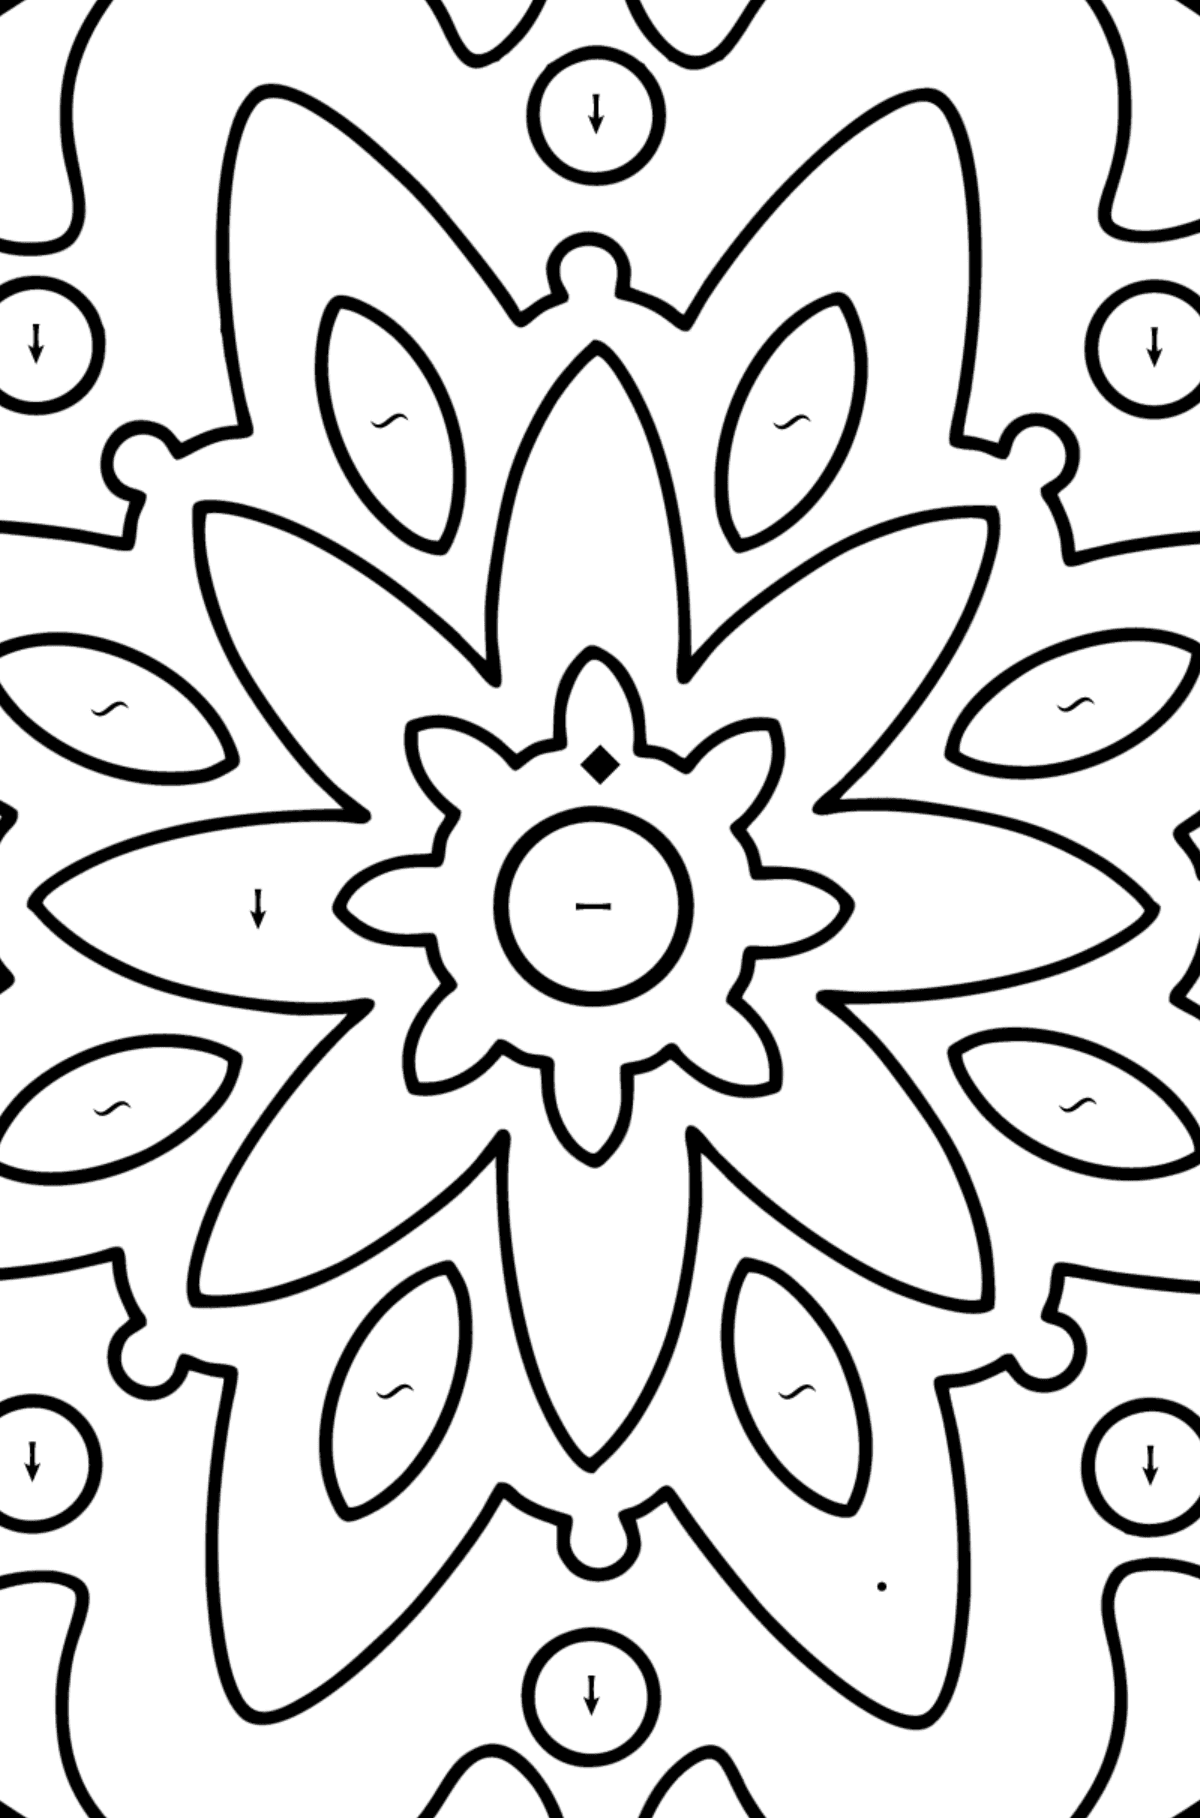 Mandala coloring page - 22 elements - Coloring by Symbols for Kids